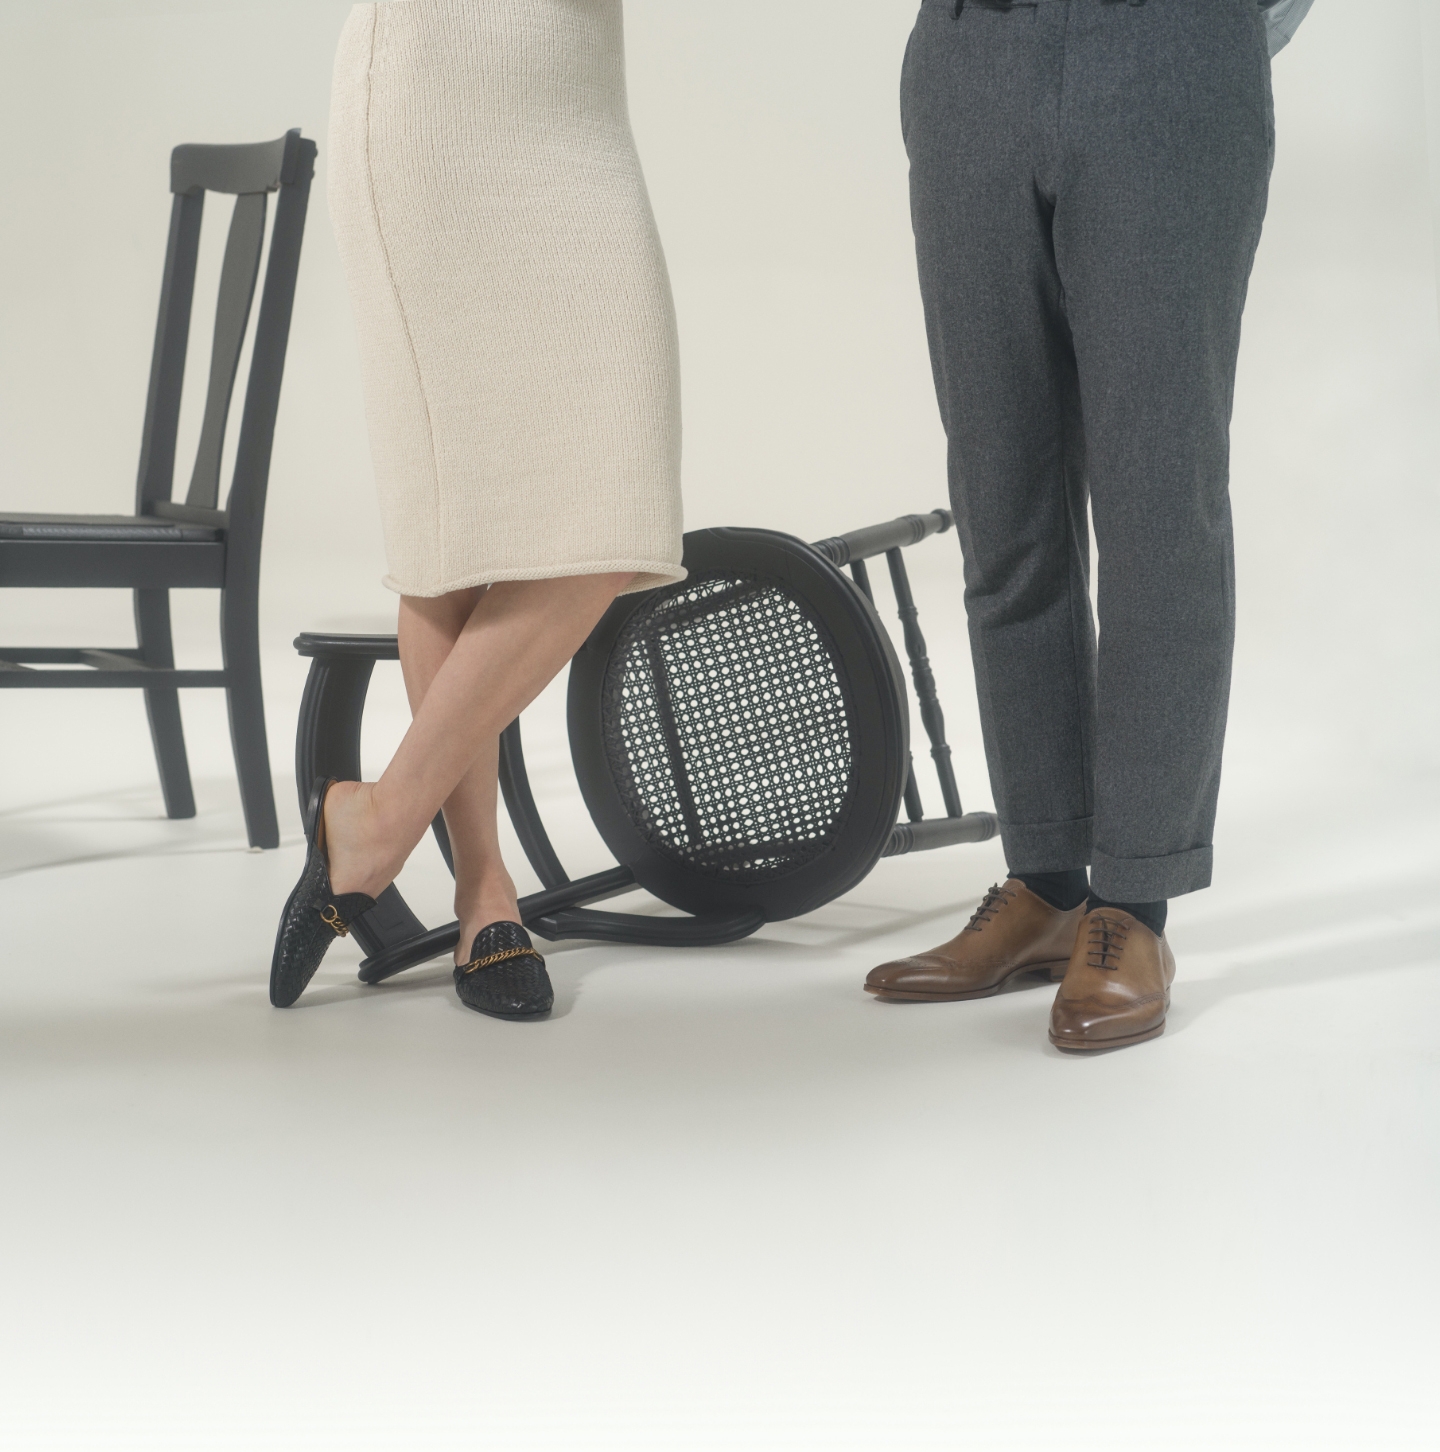 A man and woman stand near chairs while wearing Magnanni Jonas lace-ups and Carmen II loafers respectively.